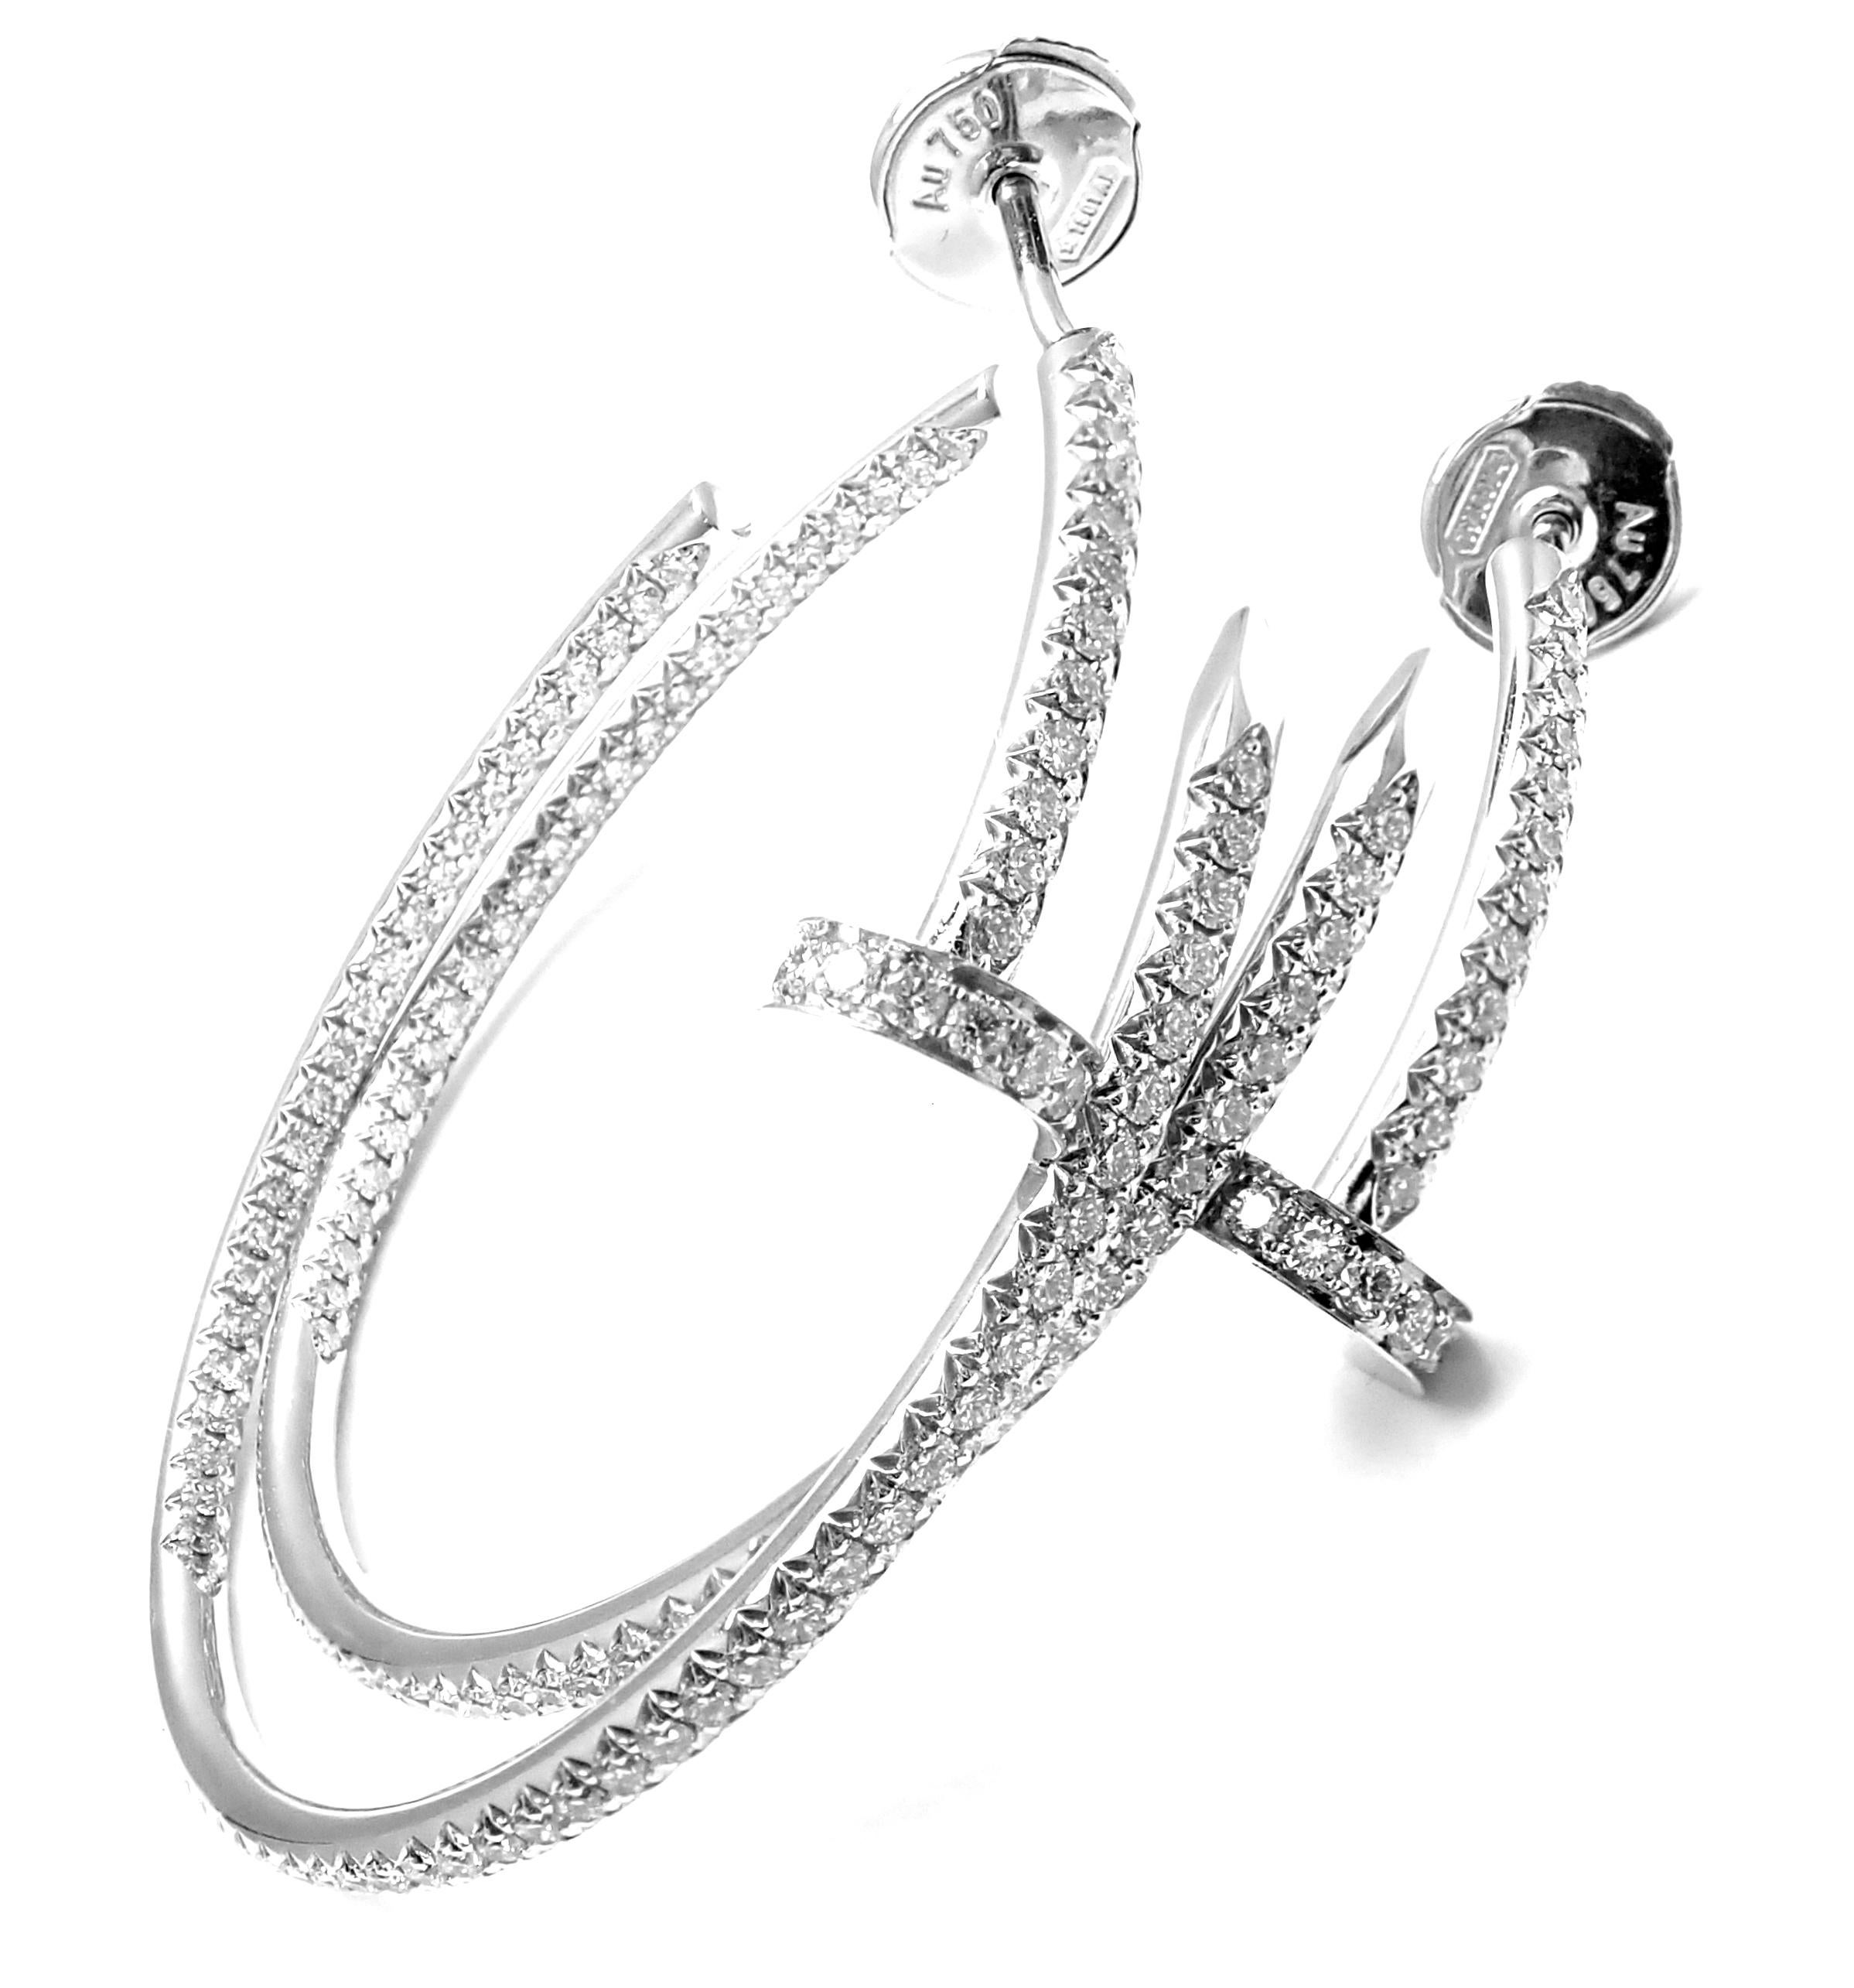 18k White Gold Diamond Juste un Clou Nail Hoop earrings by Cartier. 
With 176 round brilliant cut diamonds VVS1 clarity, E color total weight approximately 1.26ct. 
These earrings come with Cartier certificate of authenticity from Cartier store and